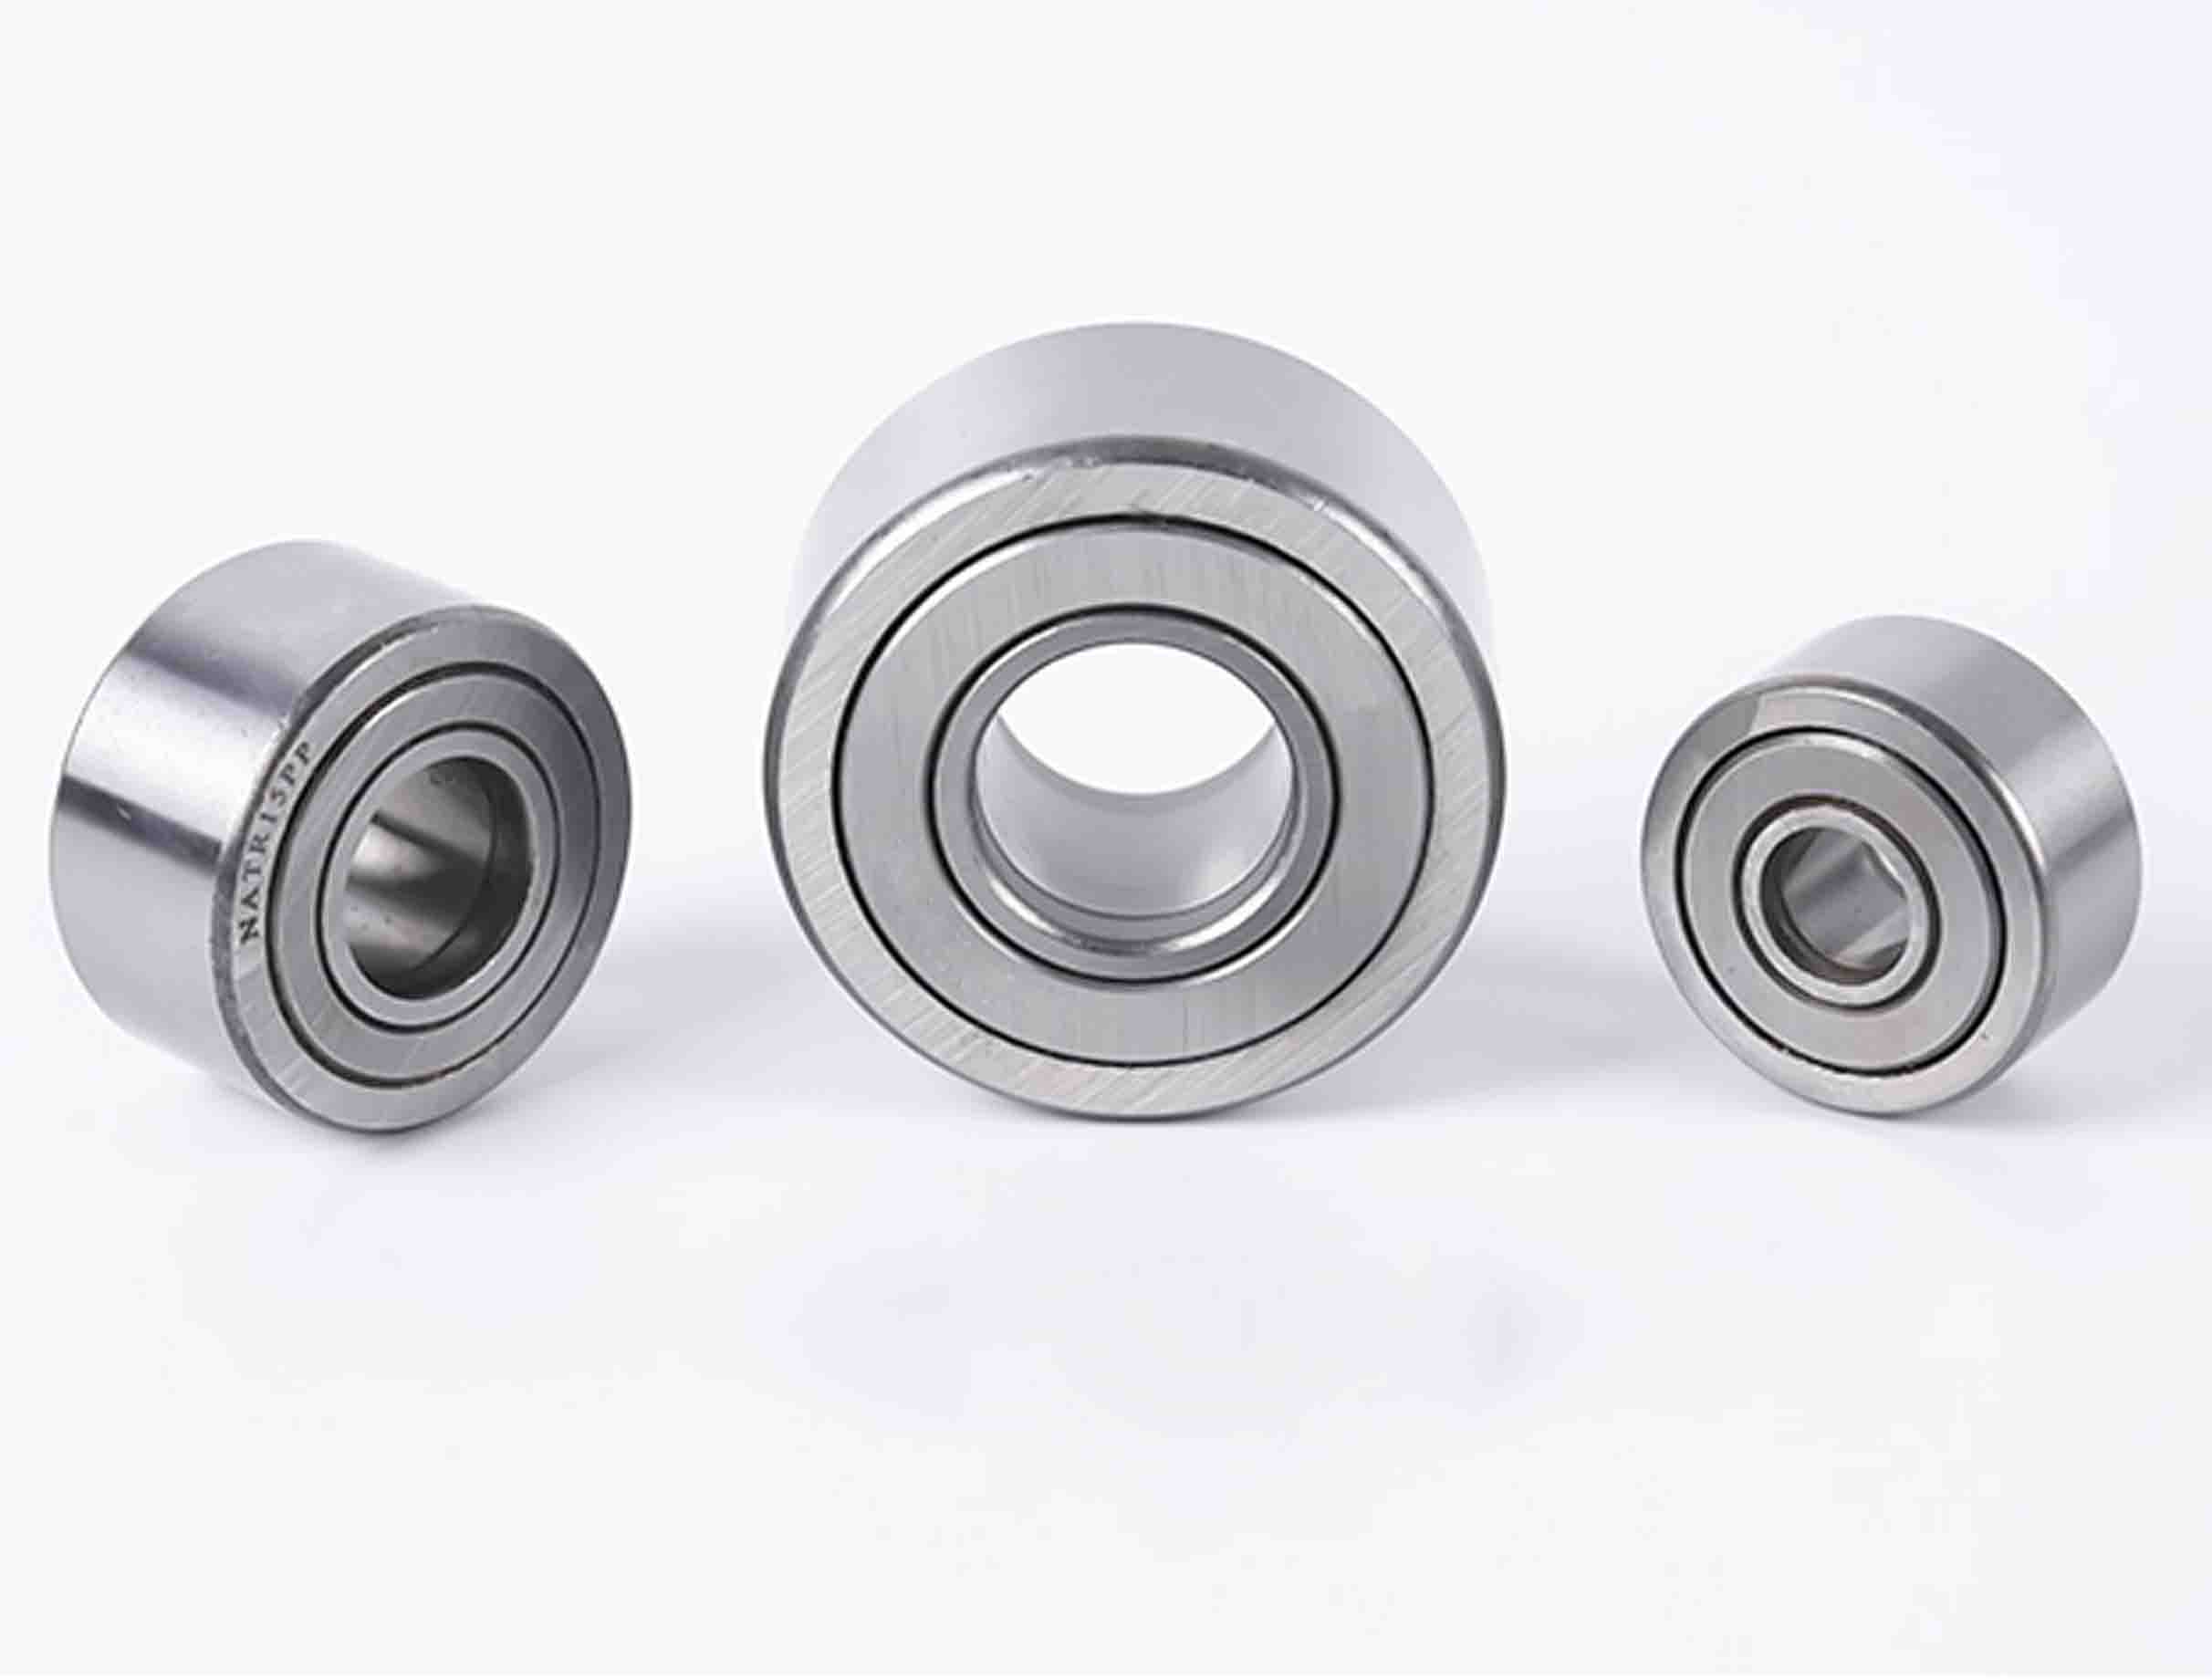 NATR10PP Support rollers yoke-type track rollers with flange rings